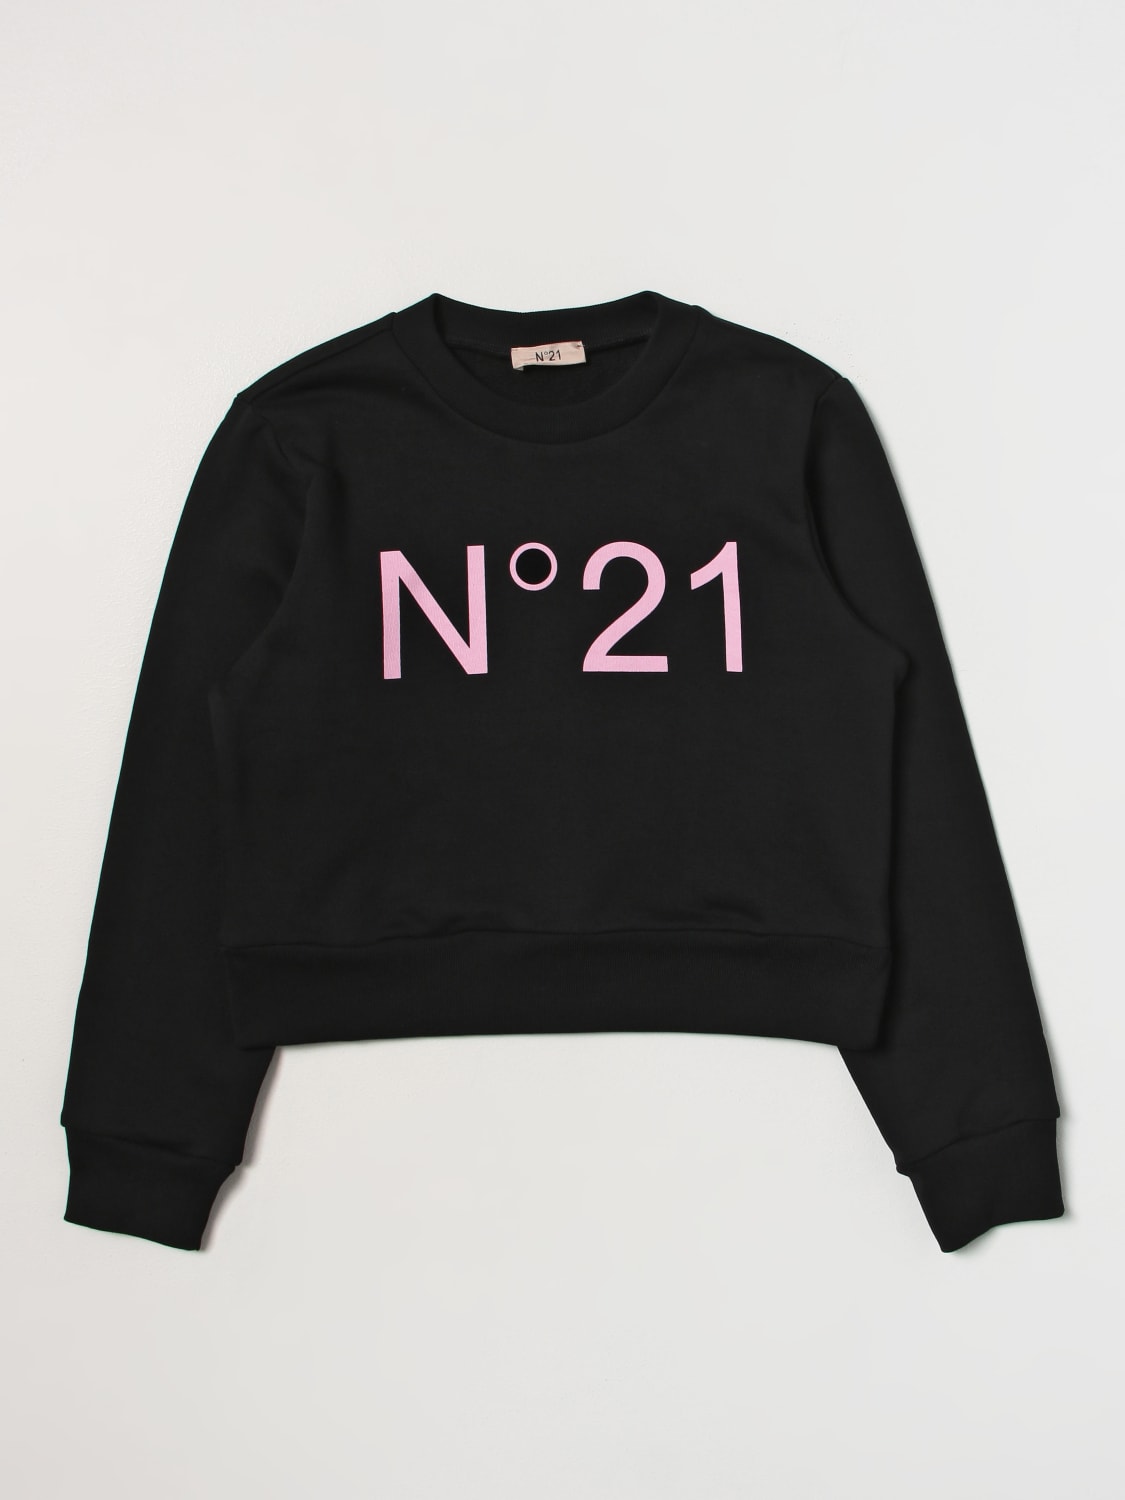 N° 21 sweater for girls